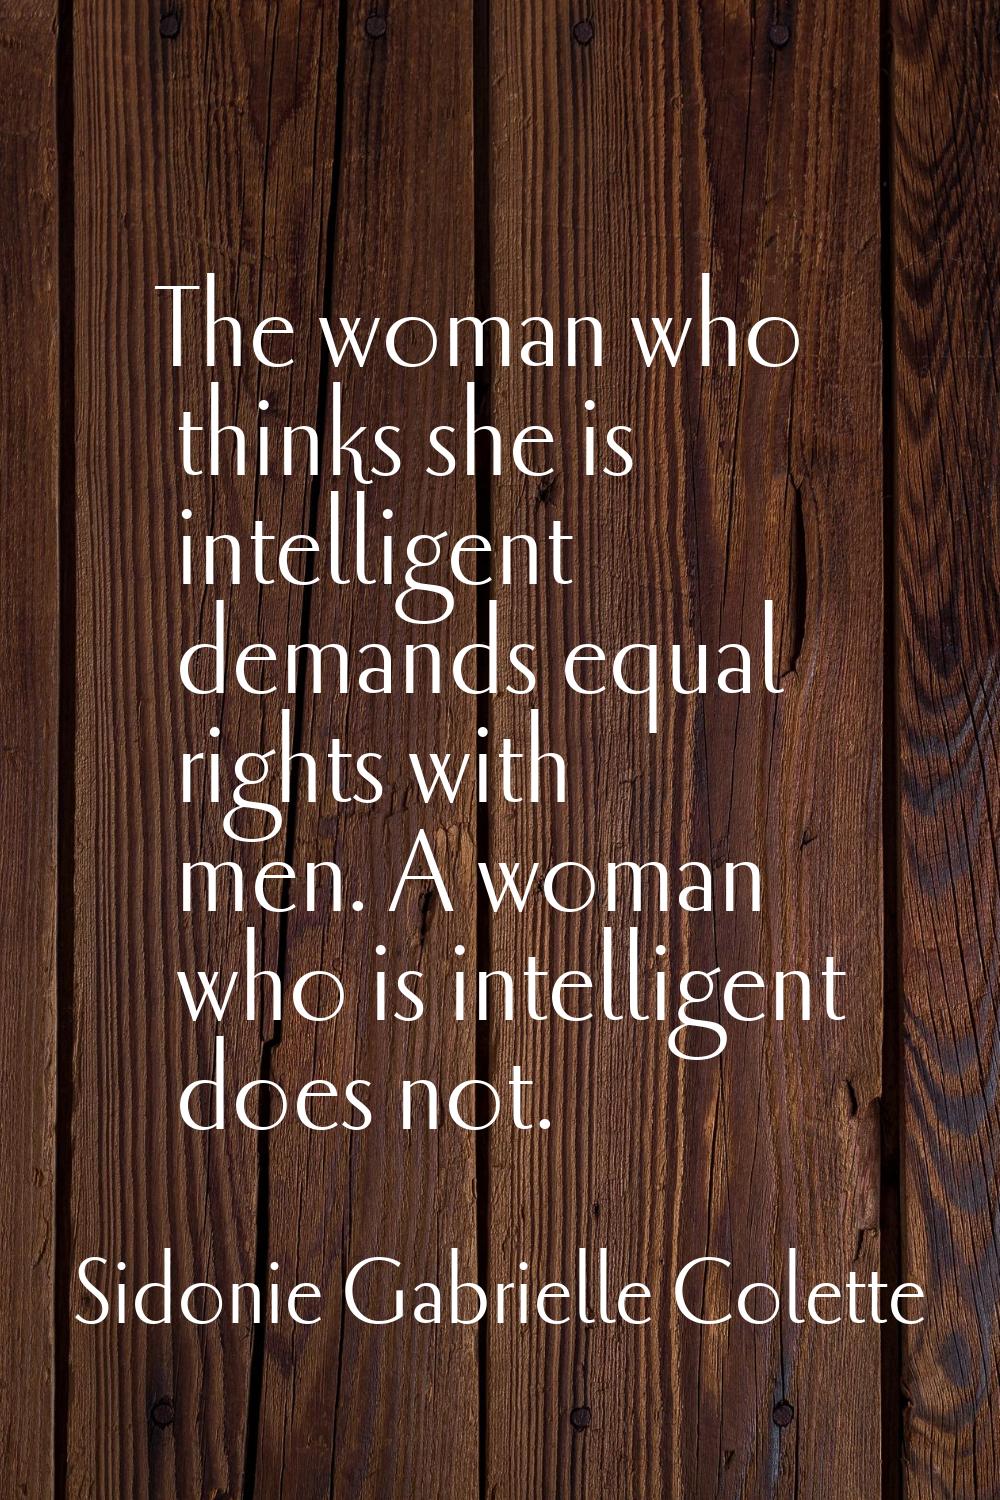 The woman who thinks she is intelligent demands equal rights with men. A woman who is intelligent d